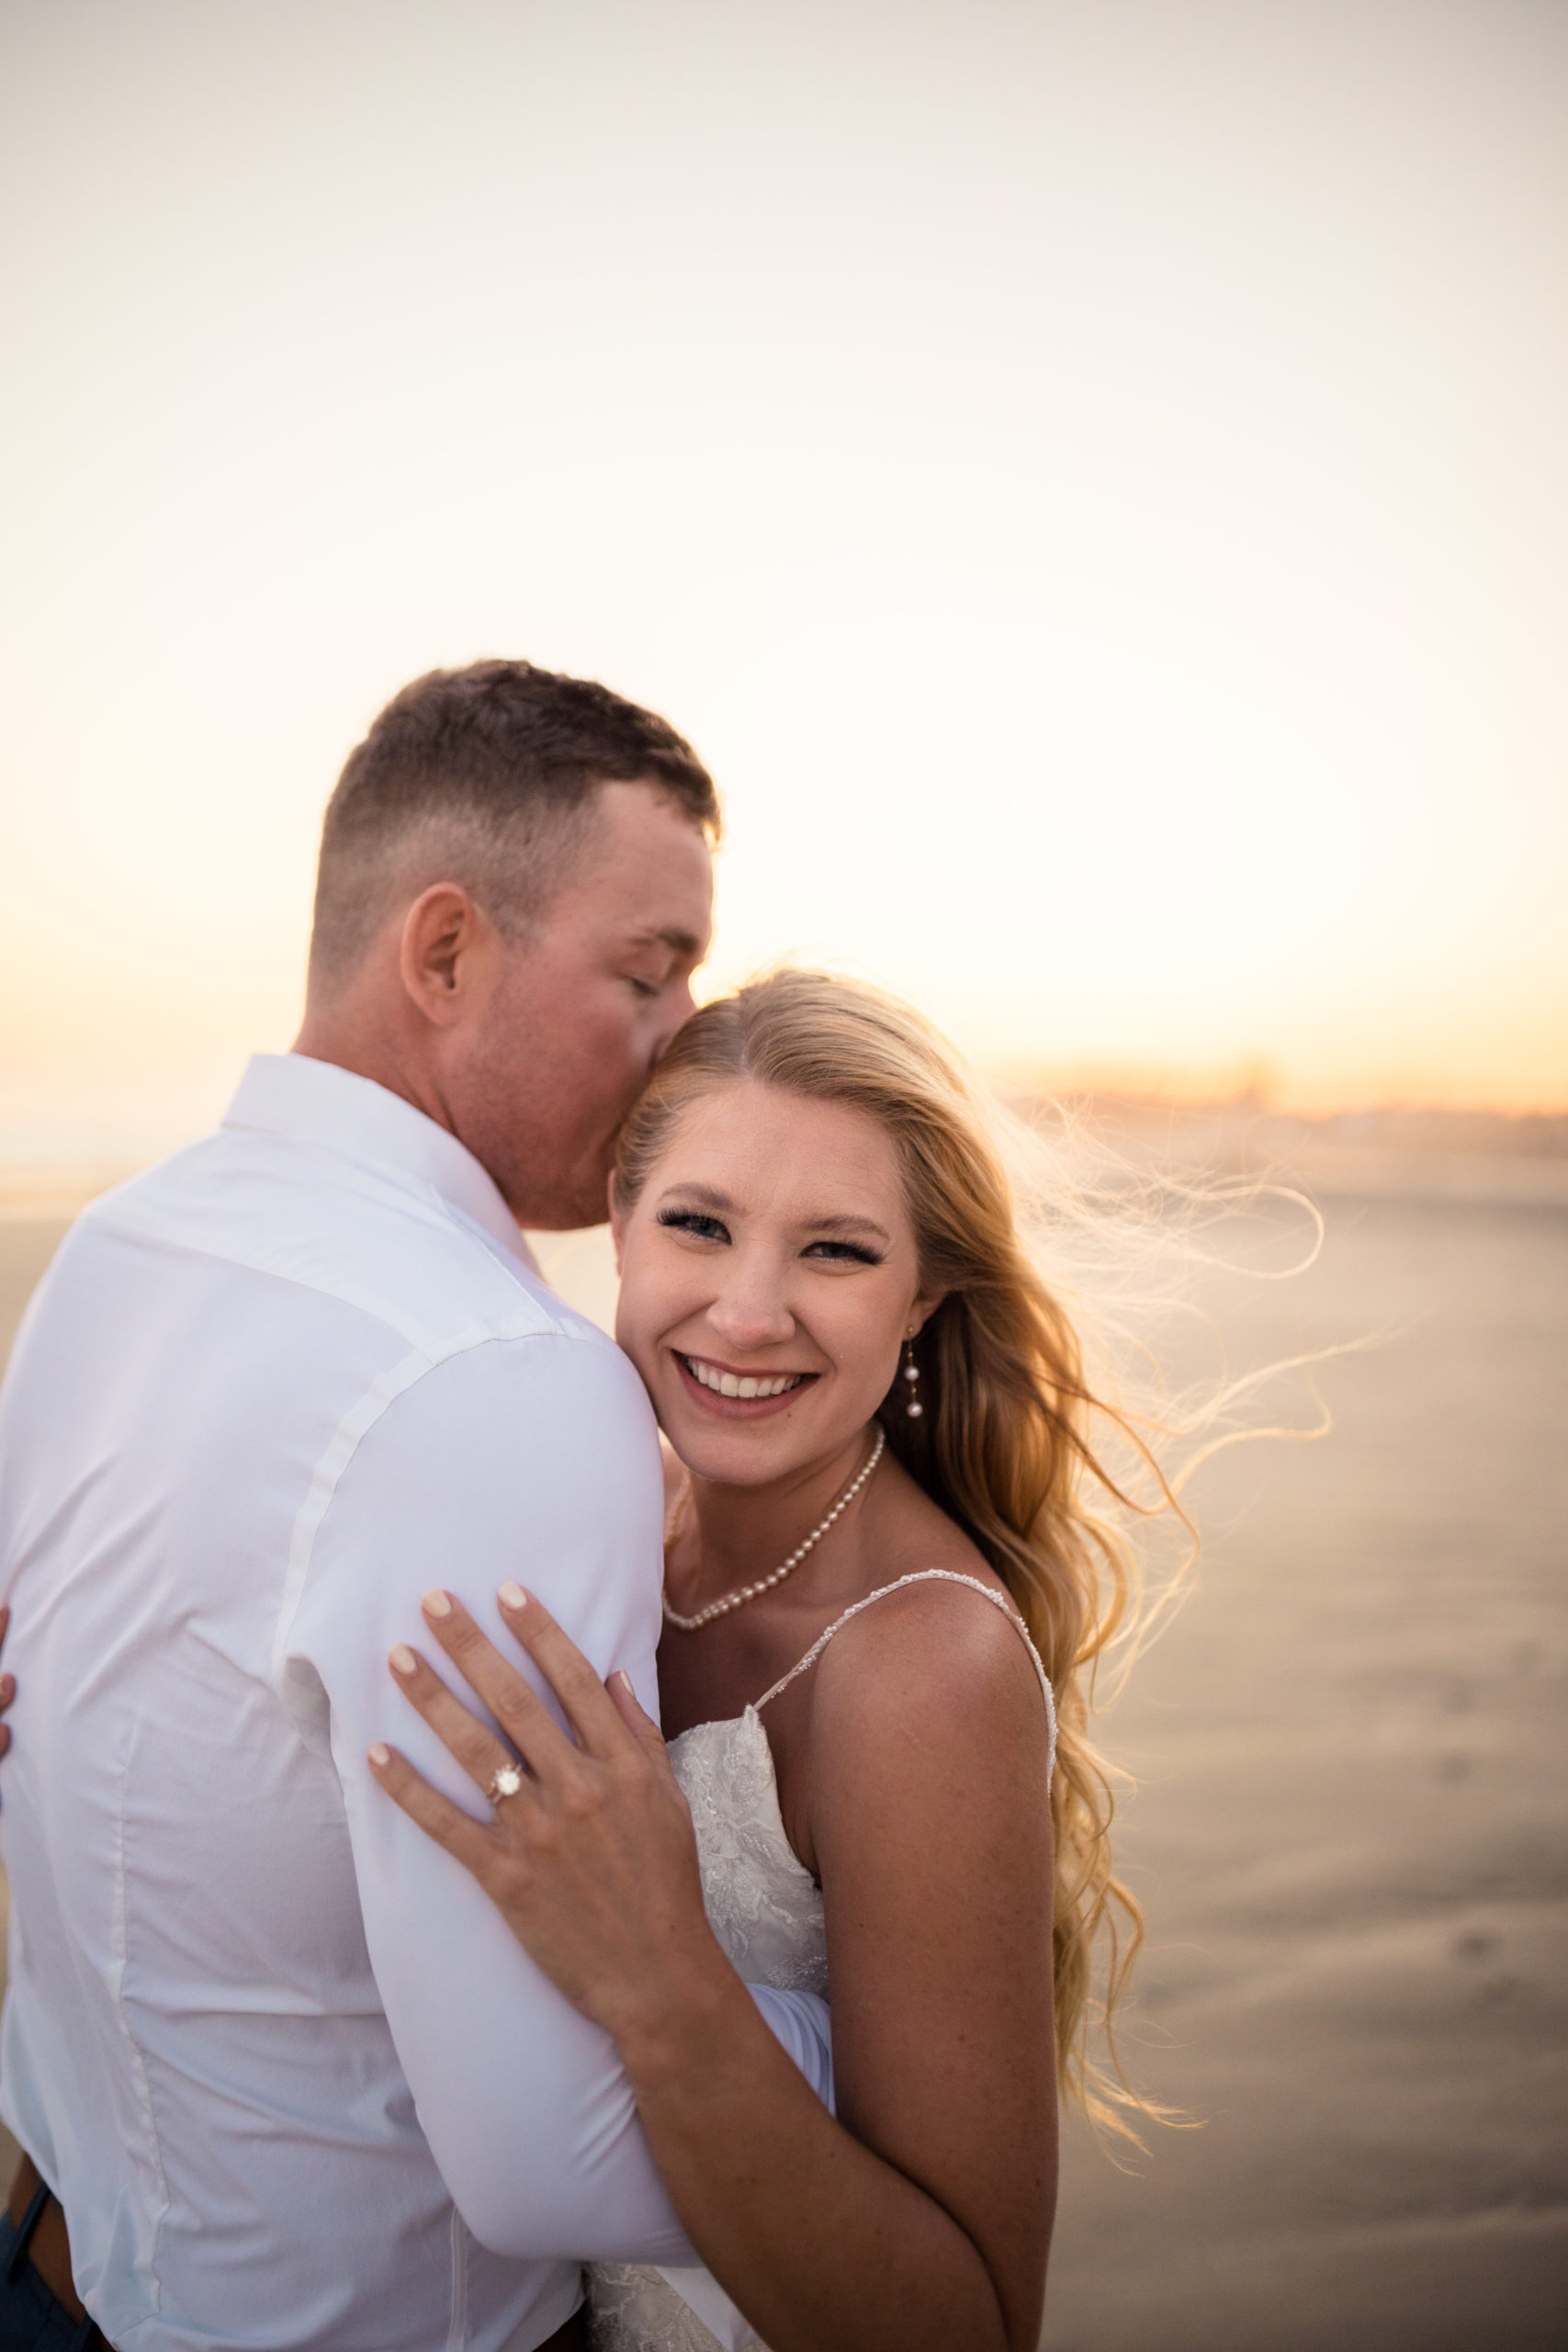 groom kissing bride on beach at sunset